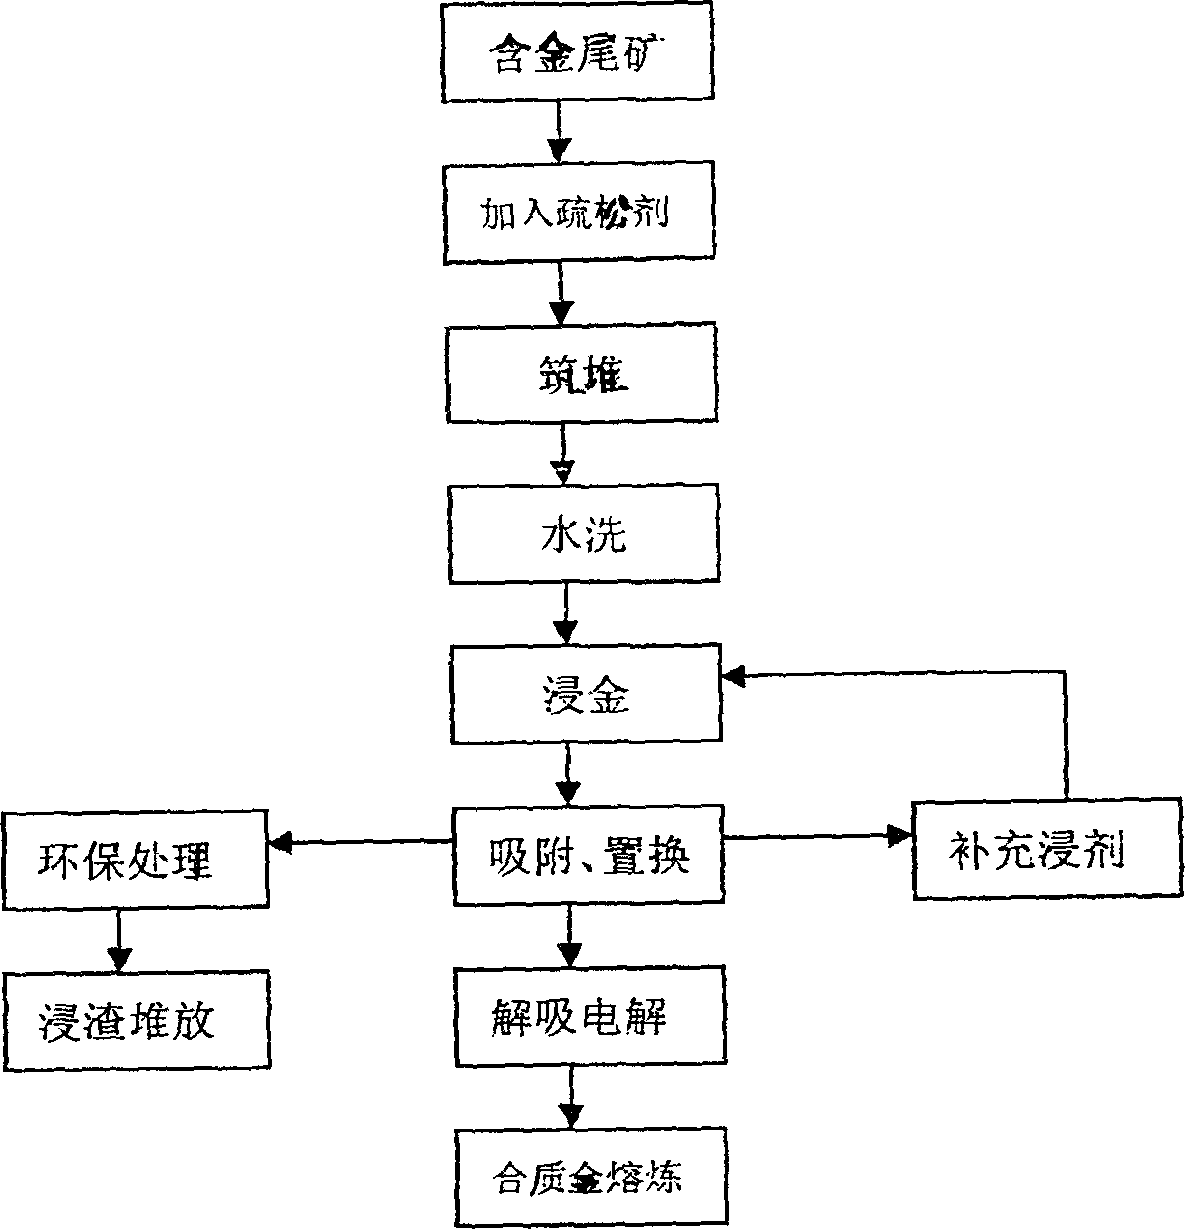 Chemical bulk stack dipping process for gold-containing tailing ore without pelletizing